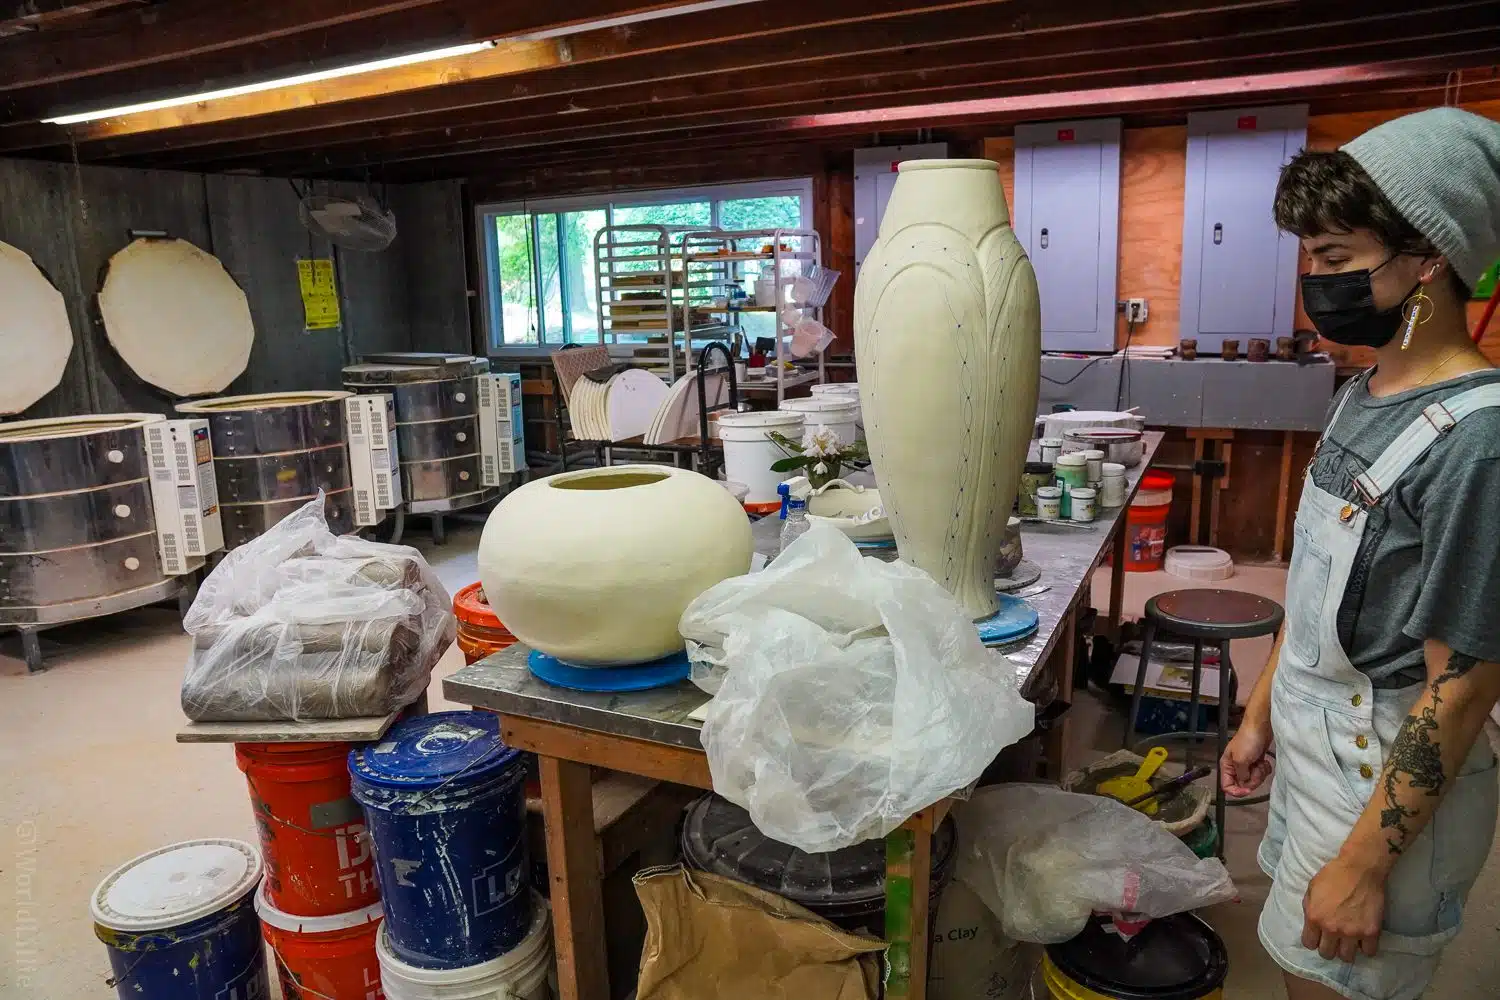 Part of the pottery studio, with kilns.